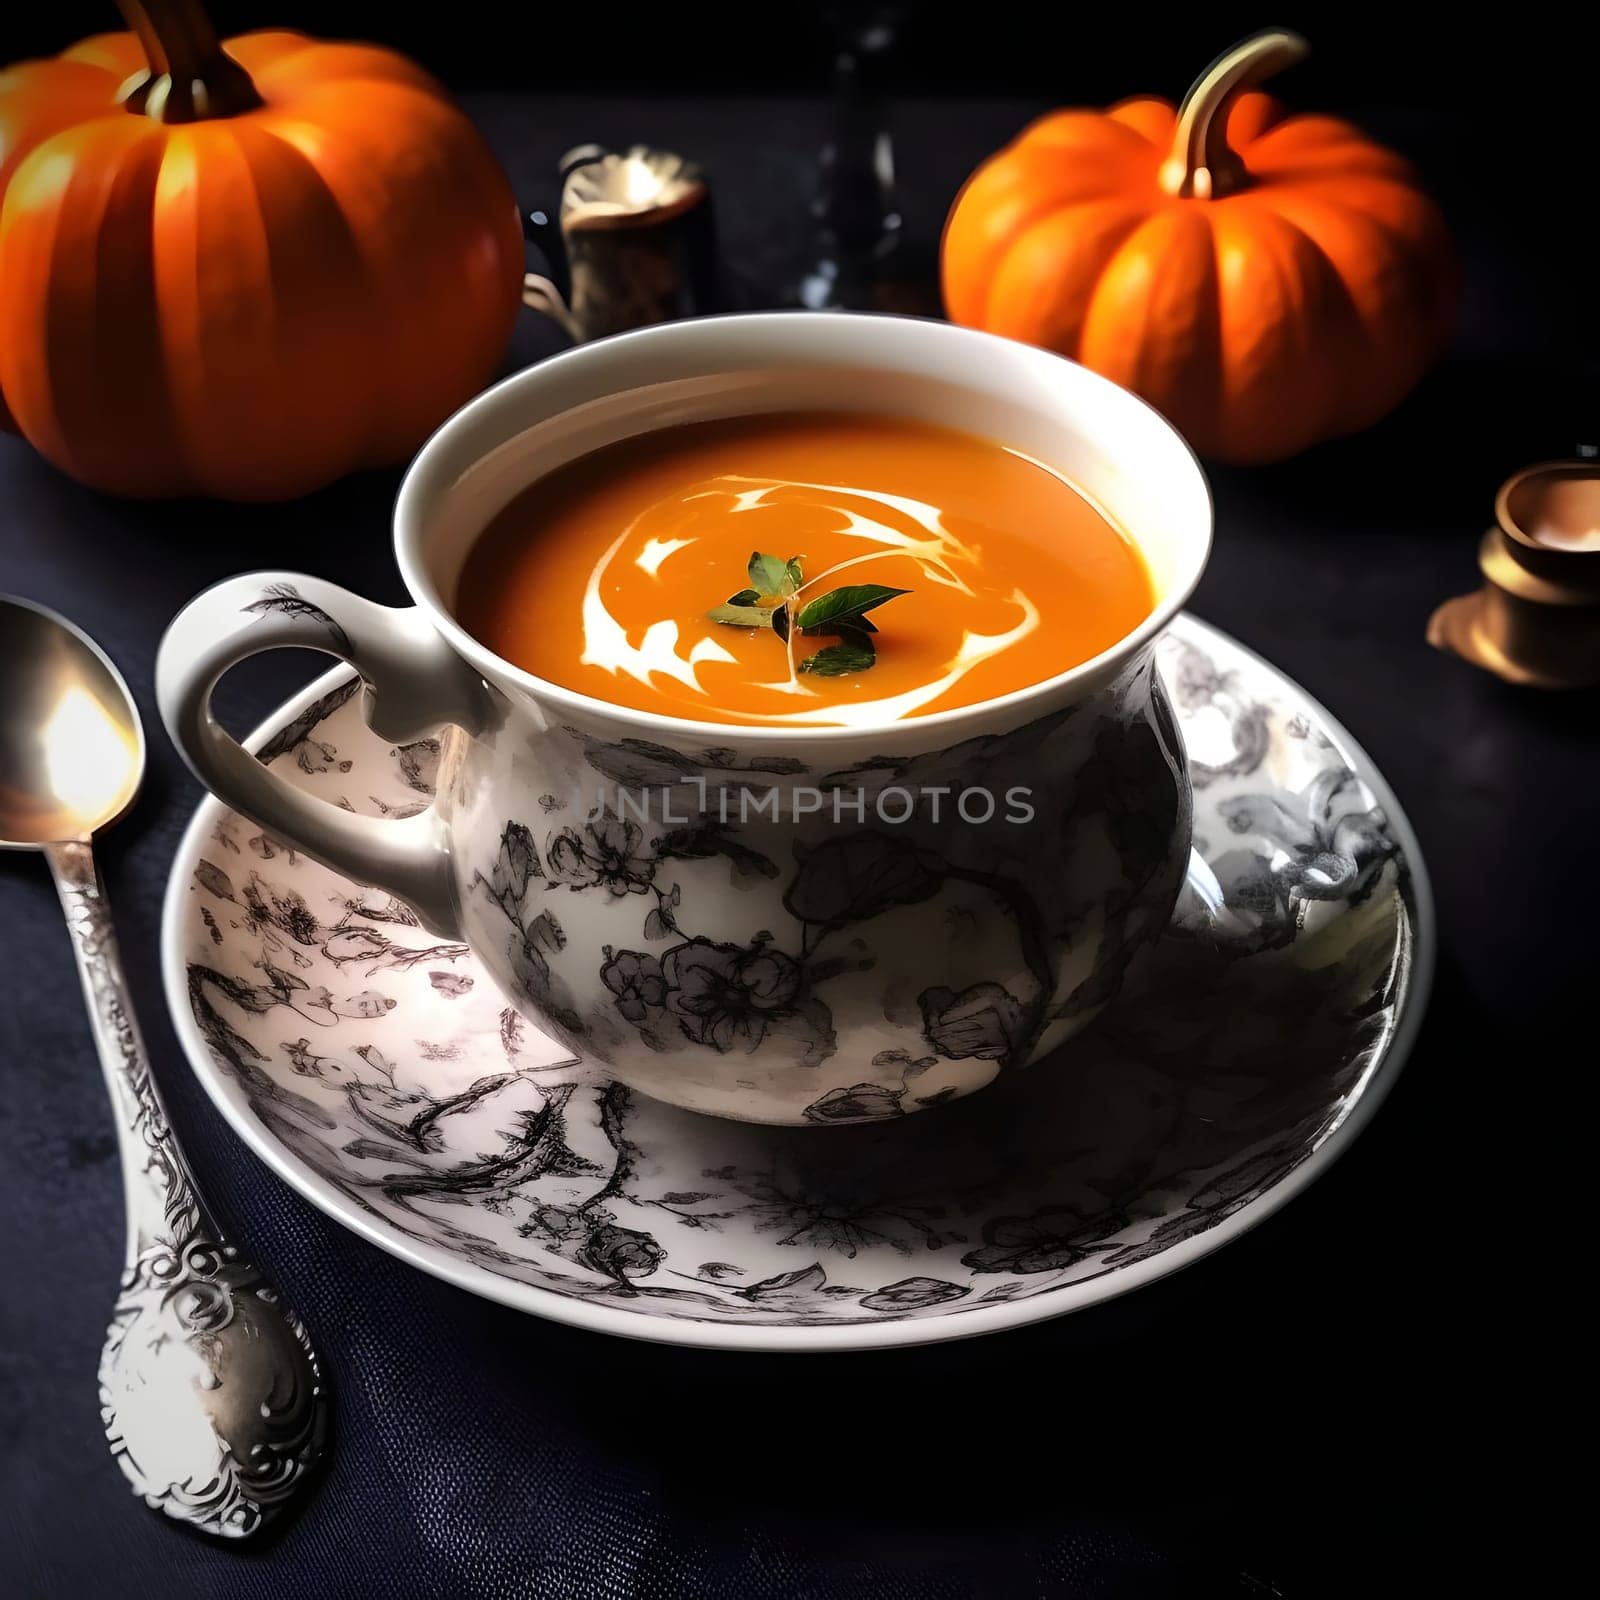 Decorated Porcelain Cup and Plate with pumpkin soup in it. Pumpkin as a dish of thanksgiving for the harvest. by ThemesS